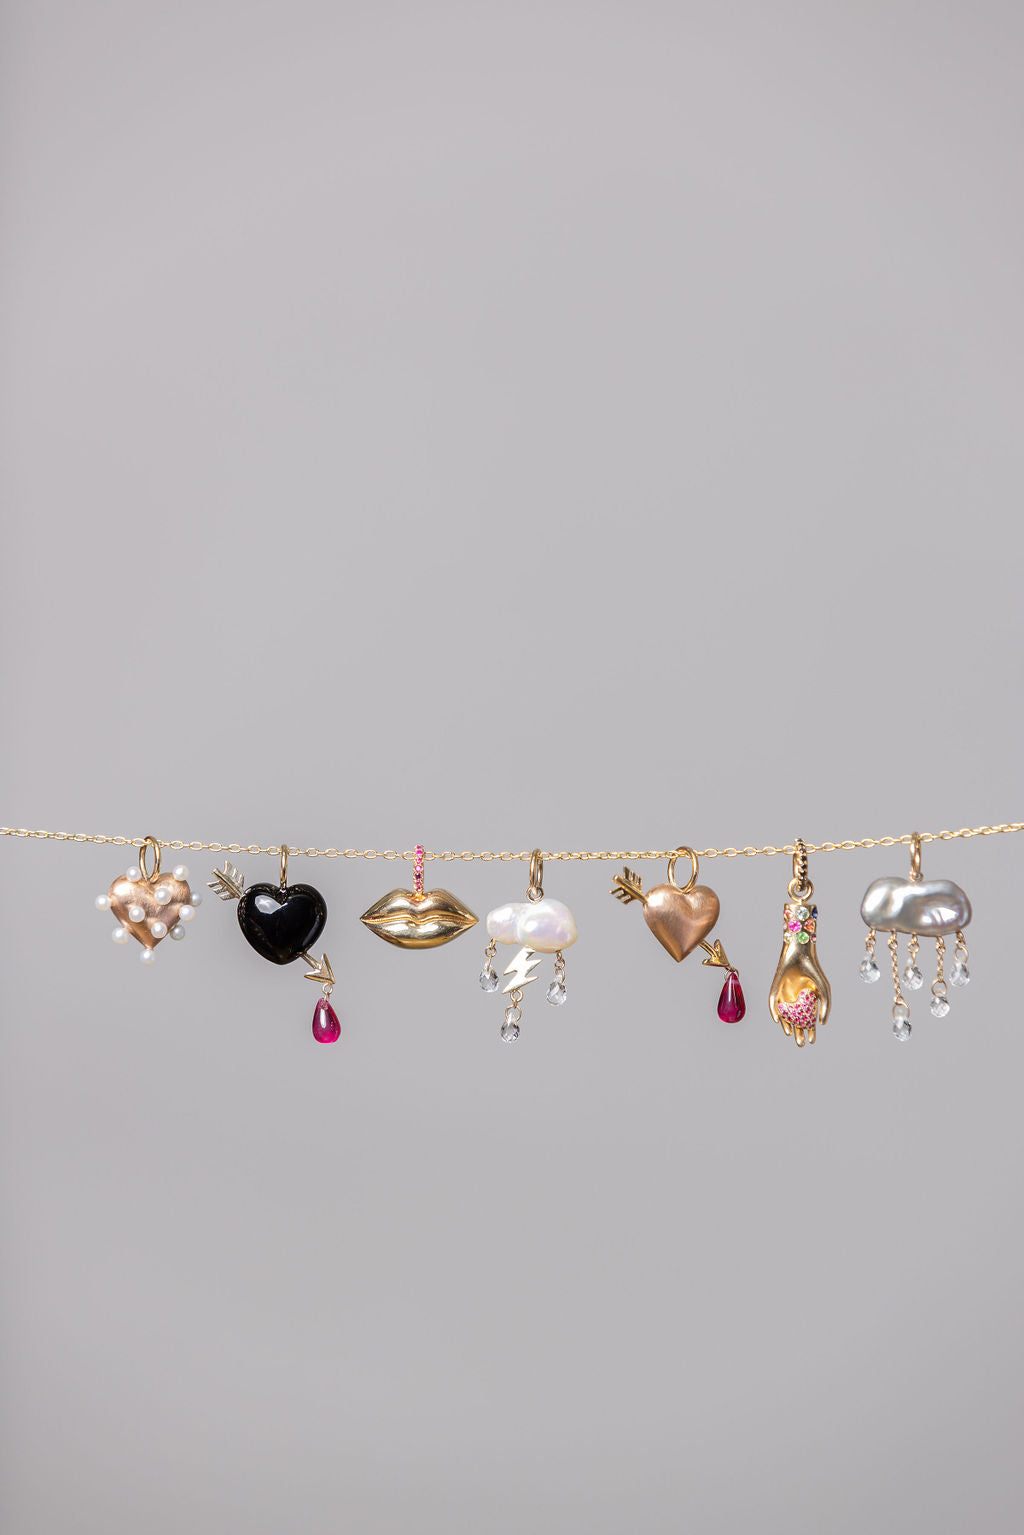 rachel quinn jewelry variations of different charms on a gold horiztonal chain